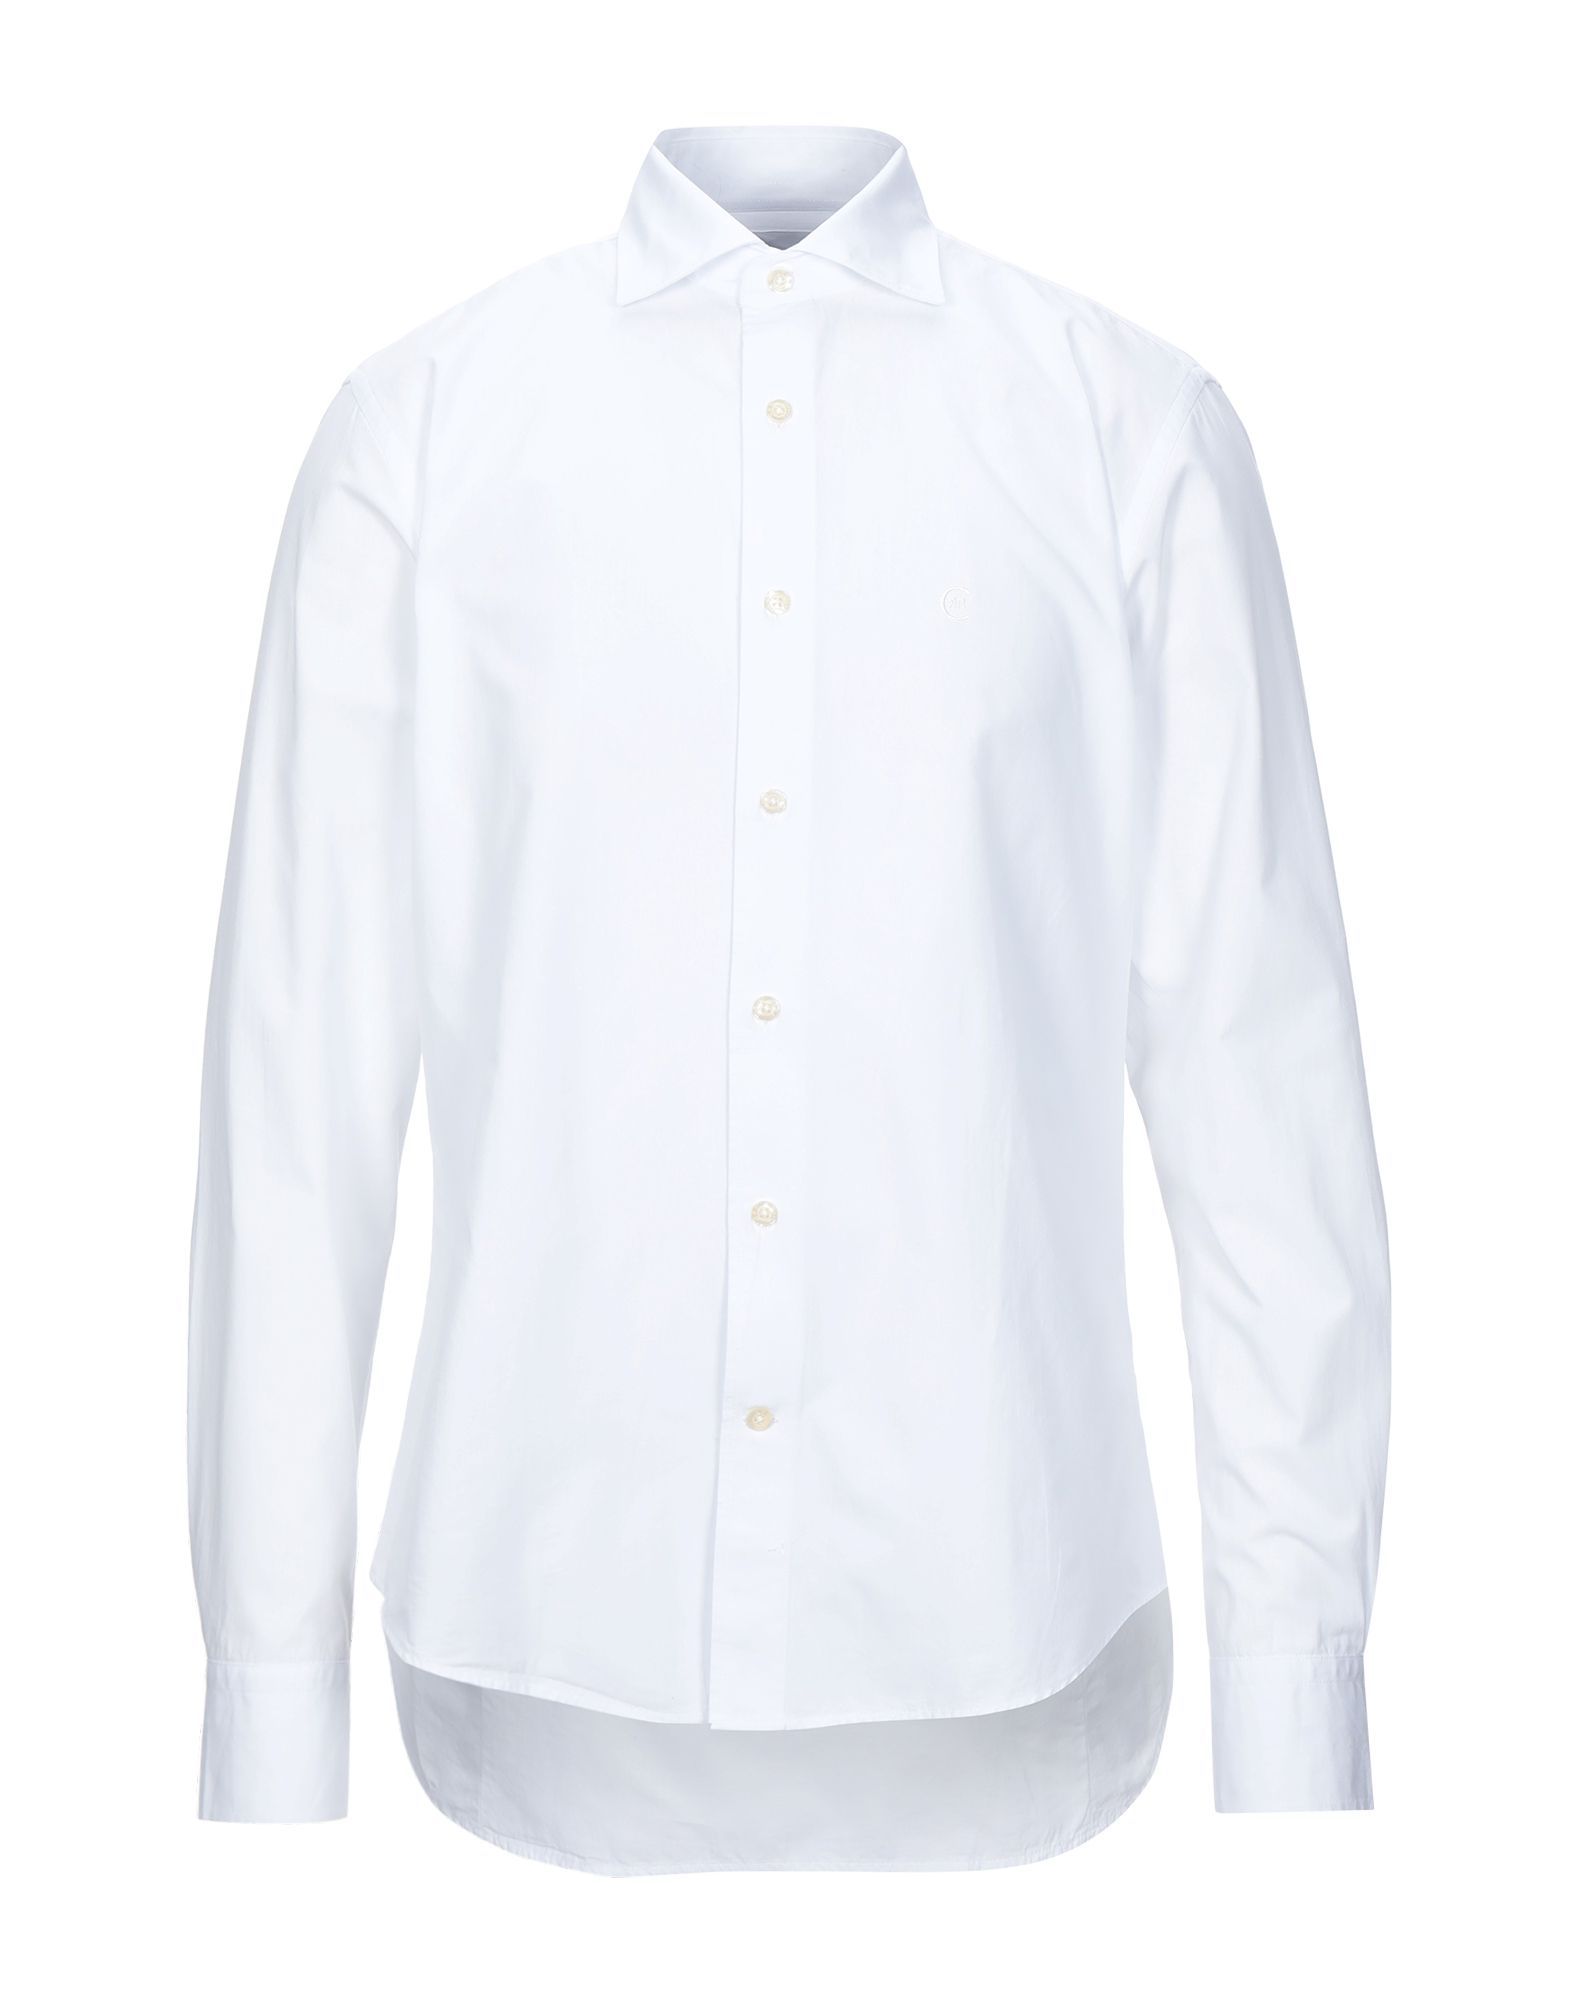 plain weave, logo, basic solid colour, front closure, button closing, long sleeves, buttoned cuffs, classic neckline, no pockets